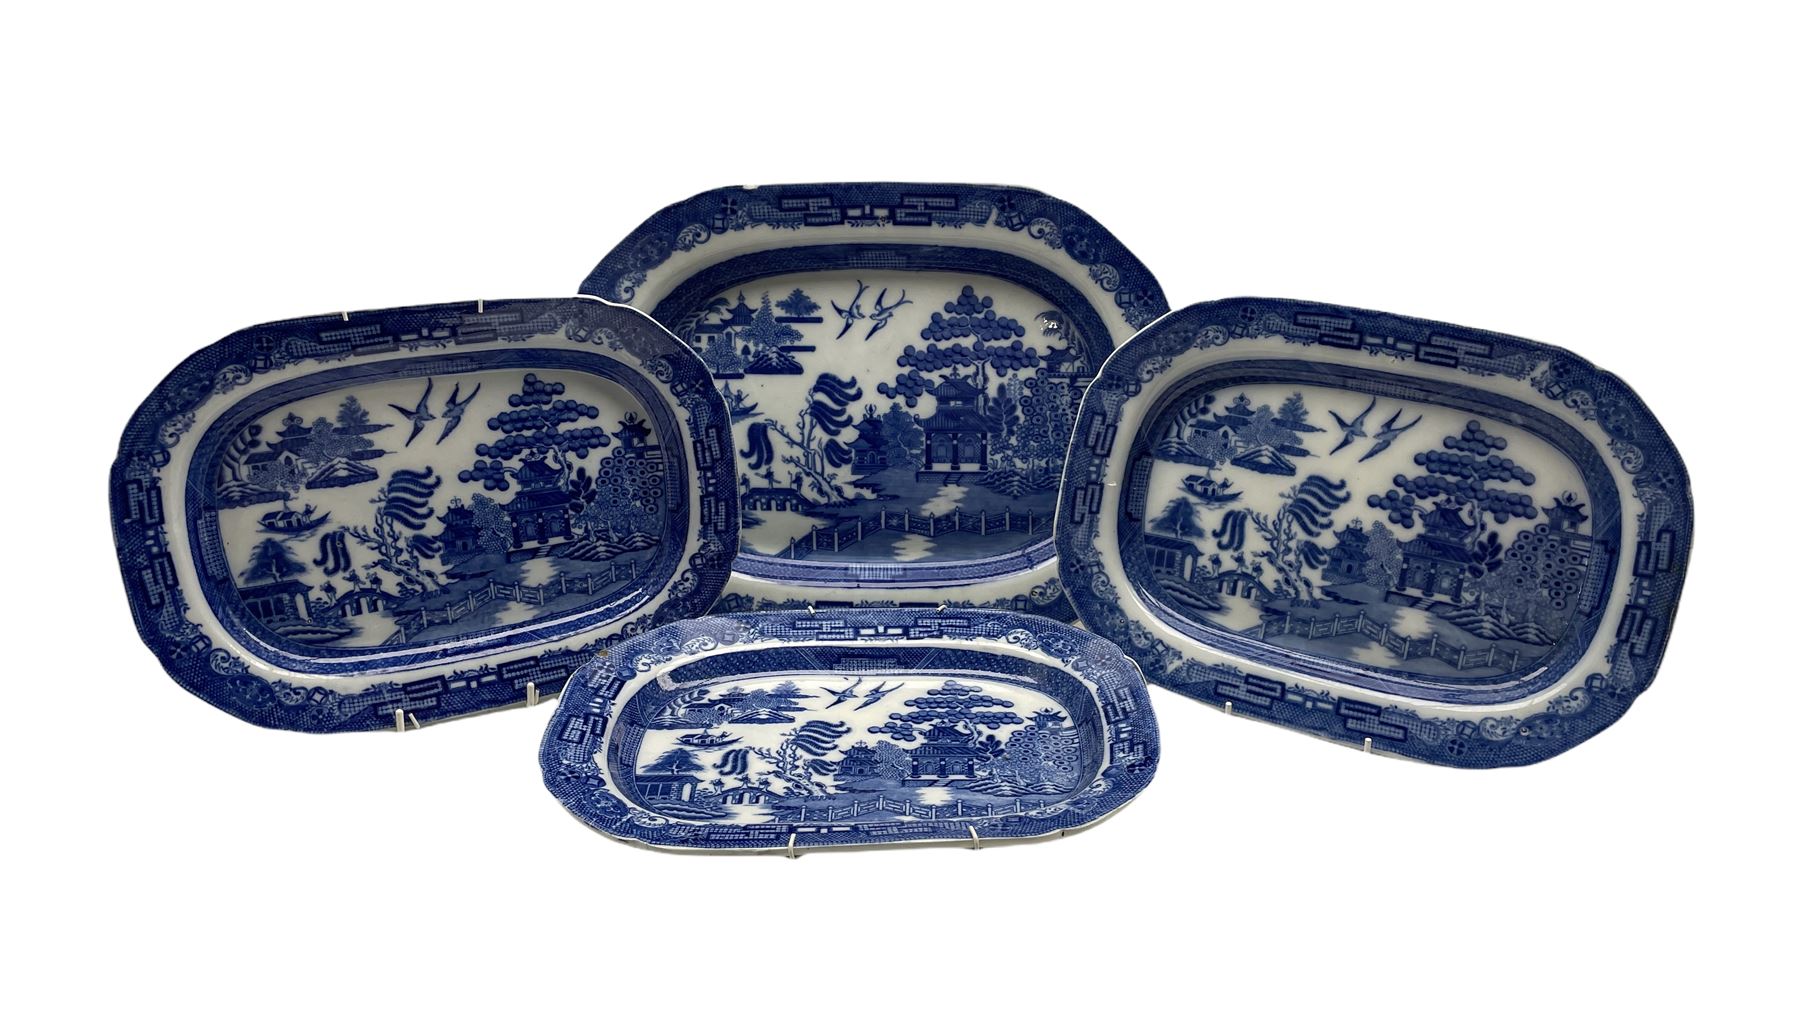 19th century Pearlware Willow pattern meat plate and three smaller meat plates in the same pattern